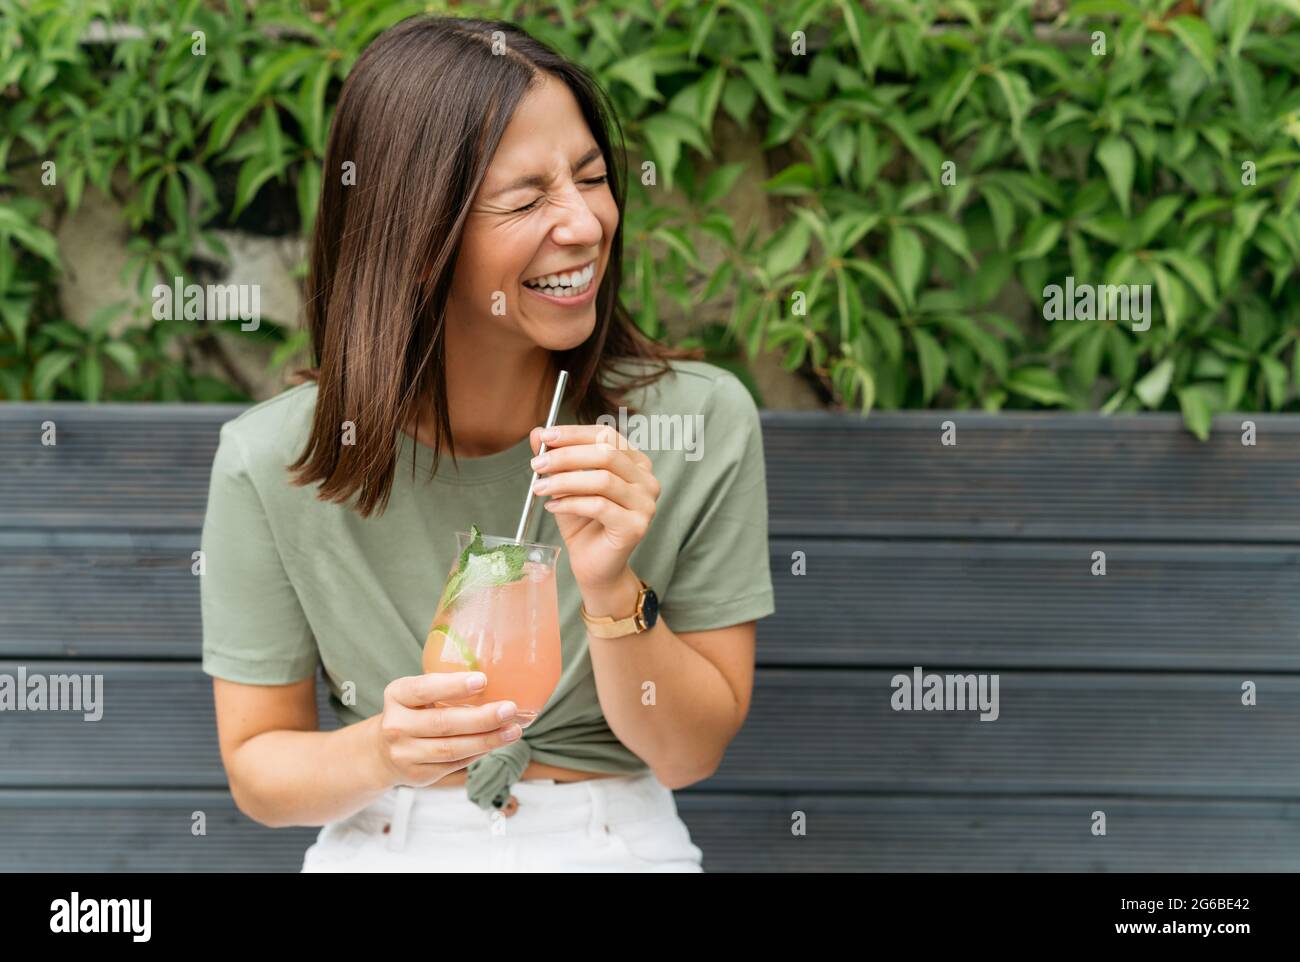 Portrait of a woman with holding a paloma cocktail sitting on a bench laughing Stock Photo